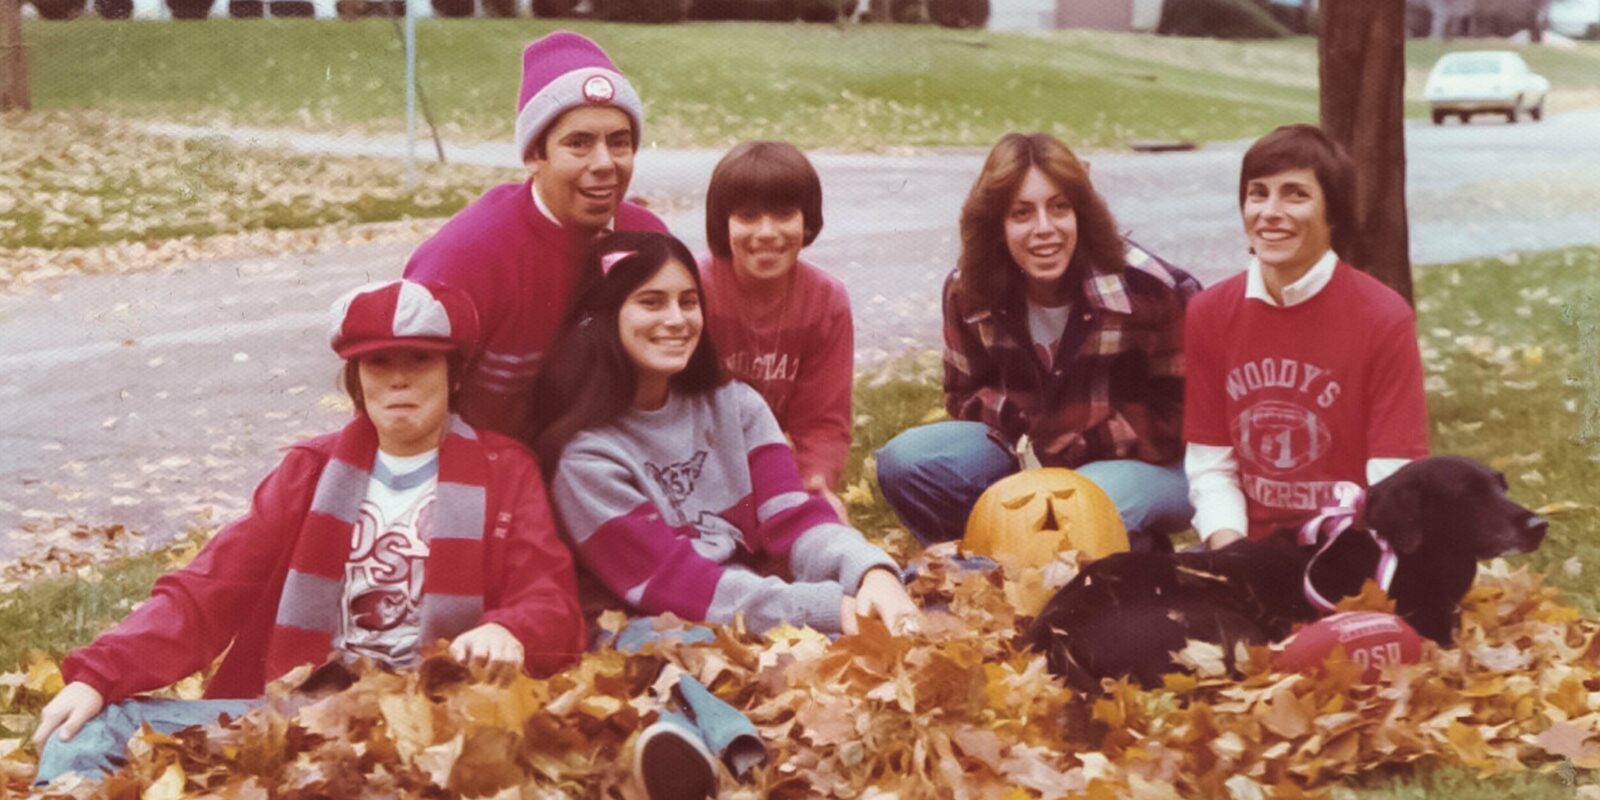 Weiler family photo sitting in leaves in the yard wearing Ohio State clothing.